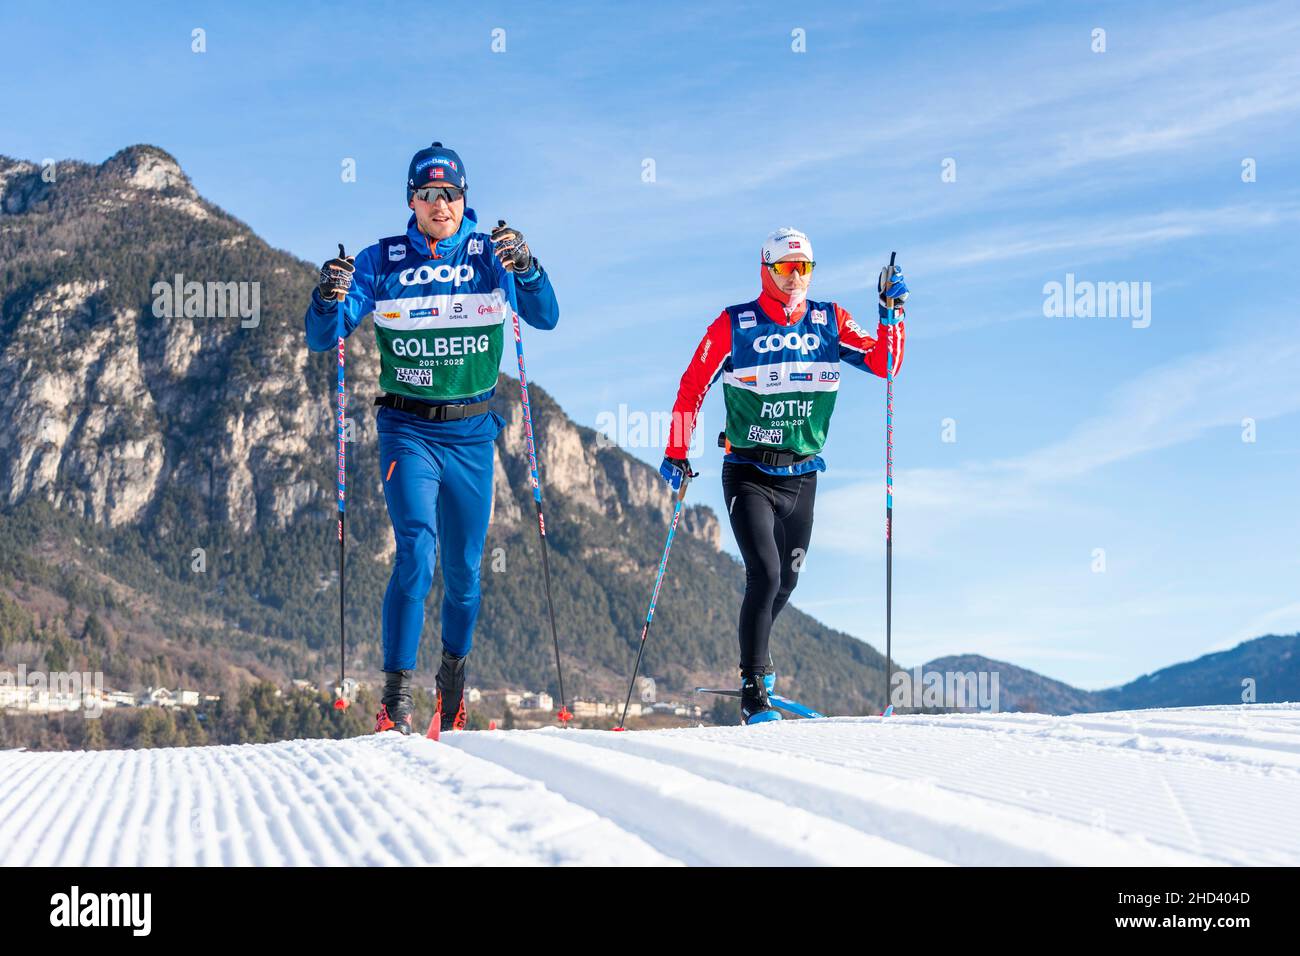 Lake Tesero, Italy 20220102.Paal Golberg (left) and Sjur Roethe during training in Val di Fiemme before the last two stages of the Tour de Ski. Photo: Terje Pedersen / NTB Stock Photo